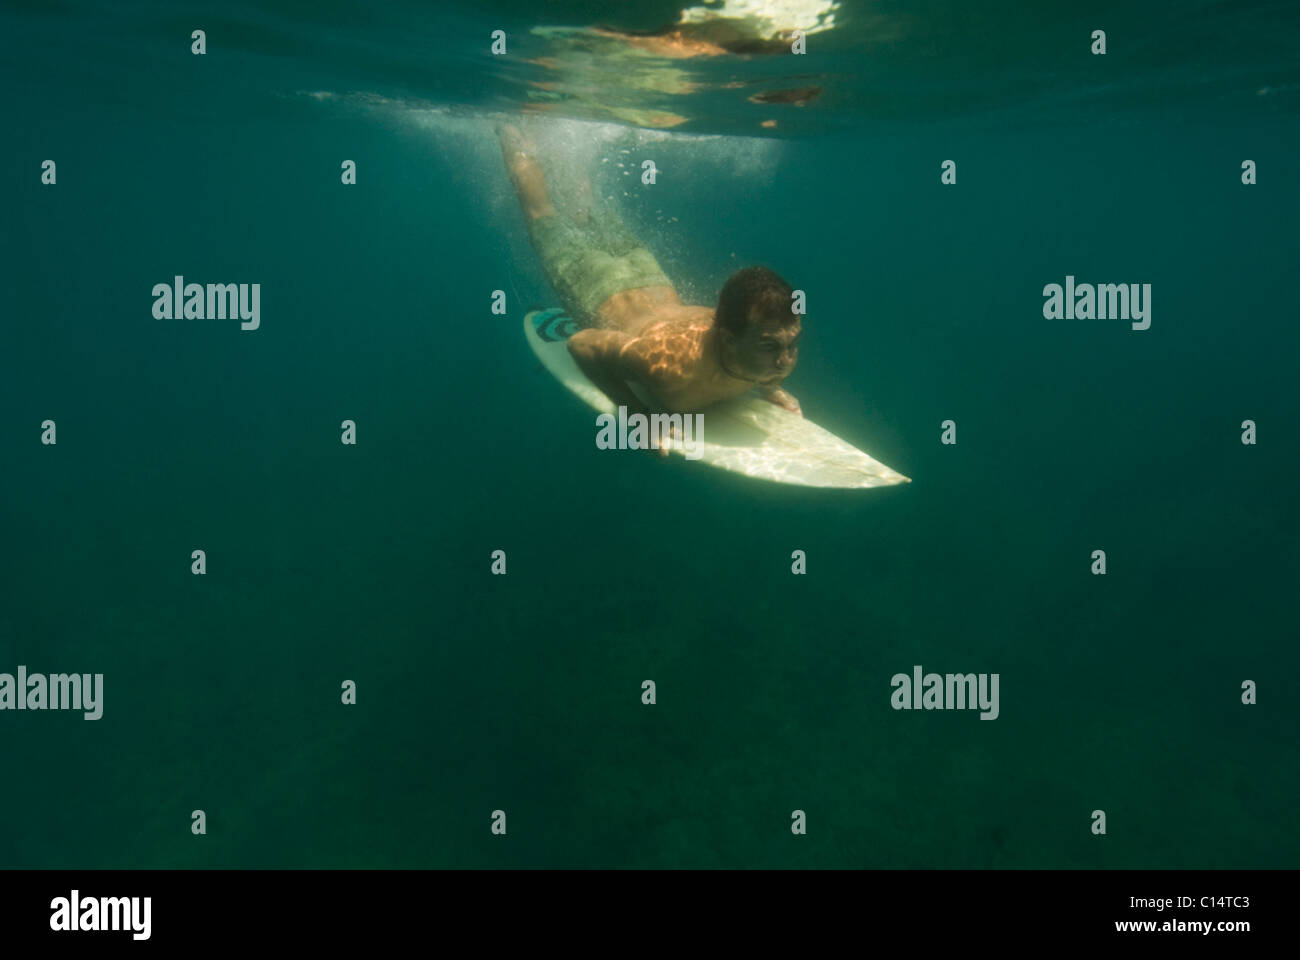 A young man diving underwater with his surfboard in Costa Rica Stock Photo